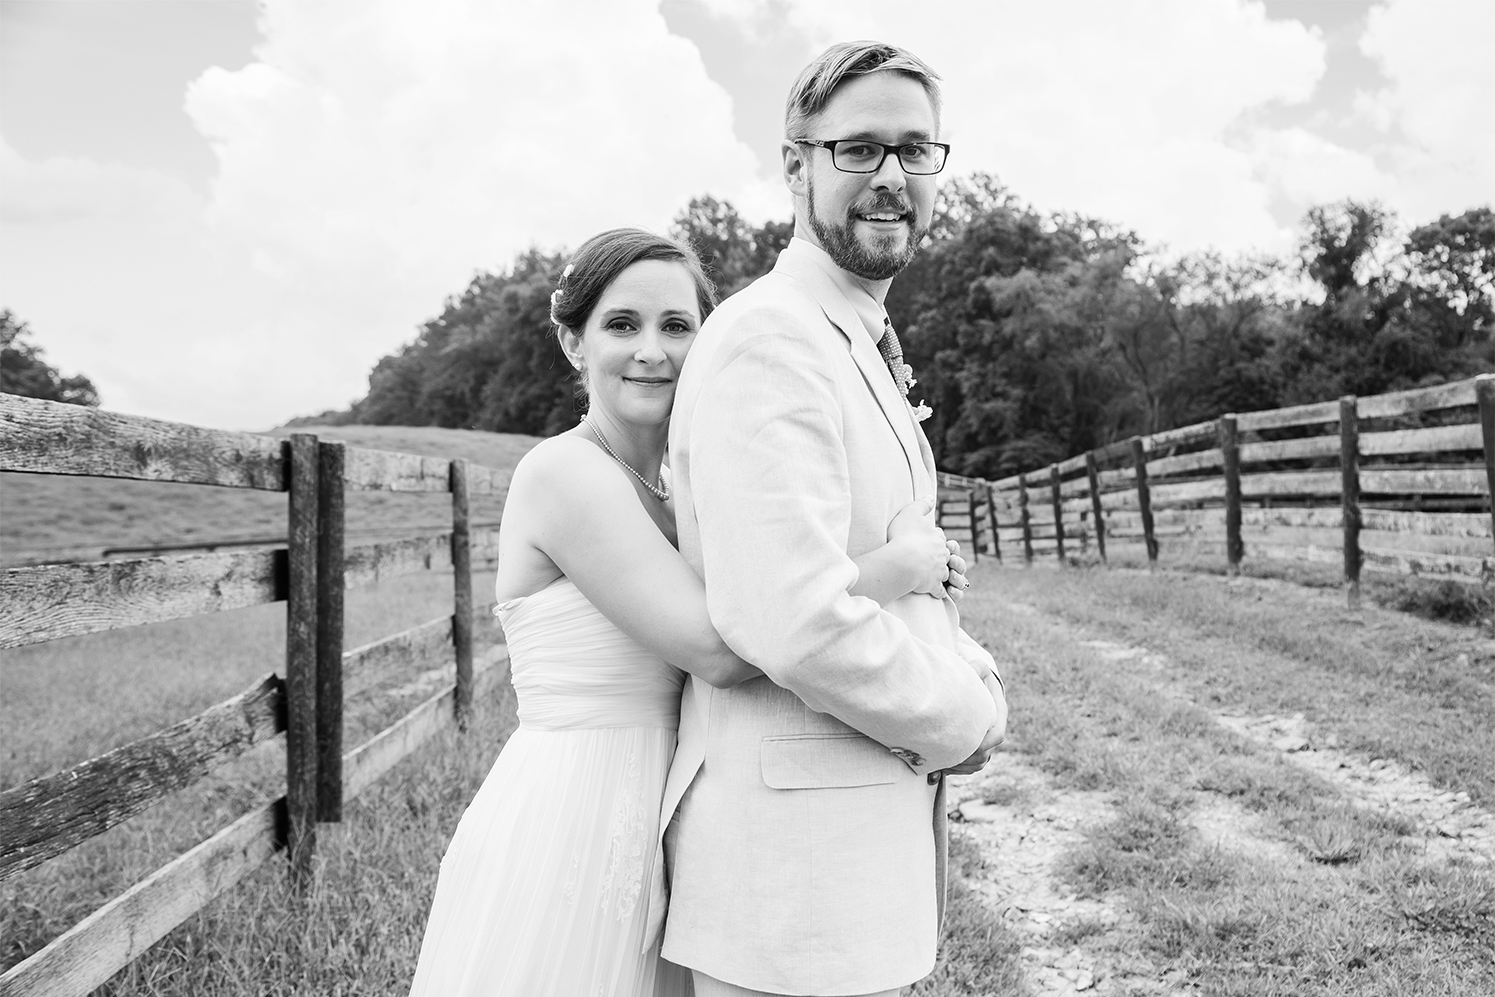 Bride and groom at horse farm barn wedding in baltimore maryland